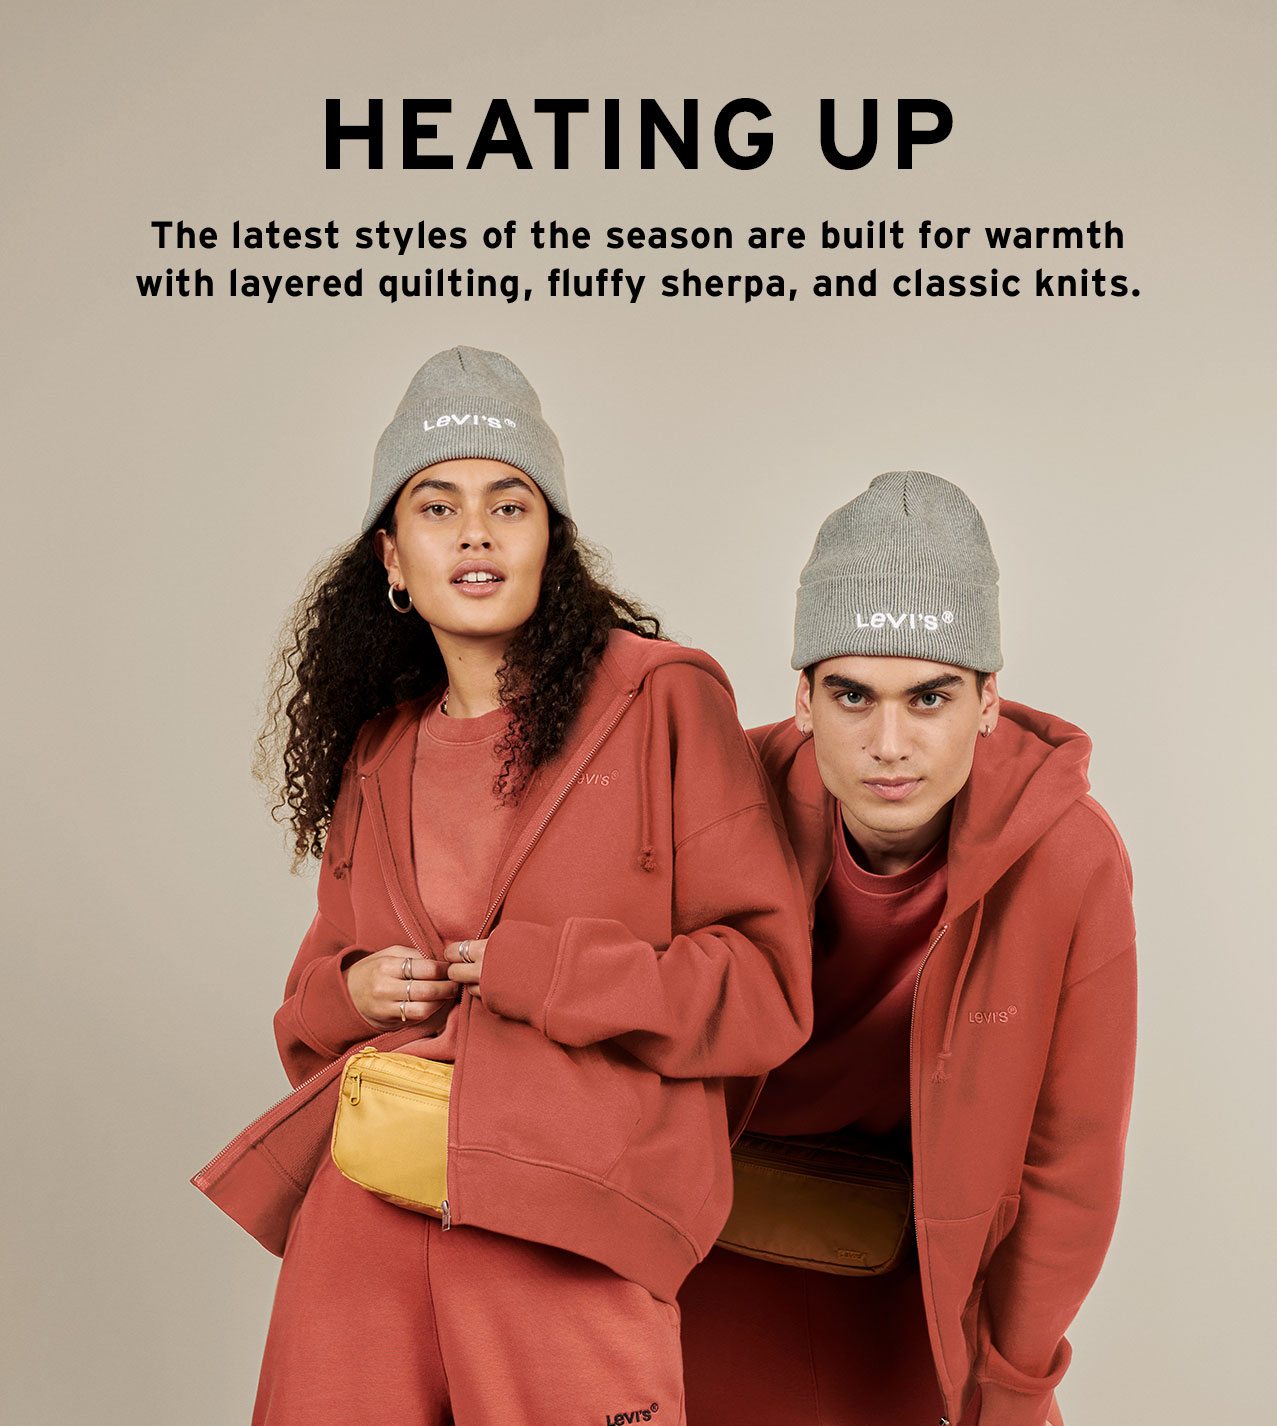 HEATING UP: THE LATEST STYLES OF THE SEASON